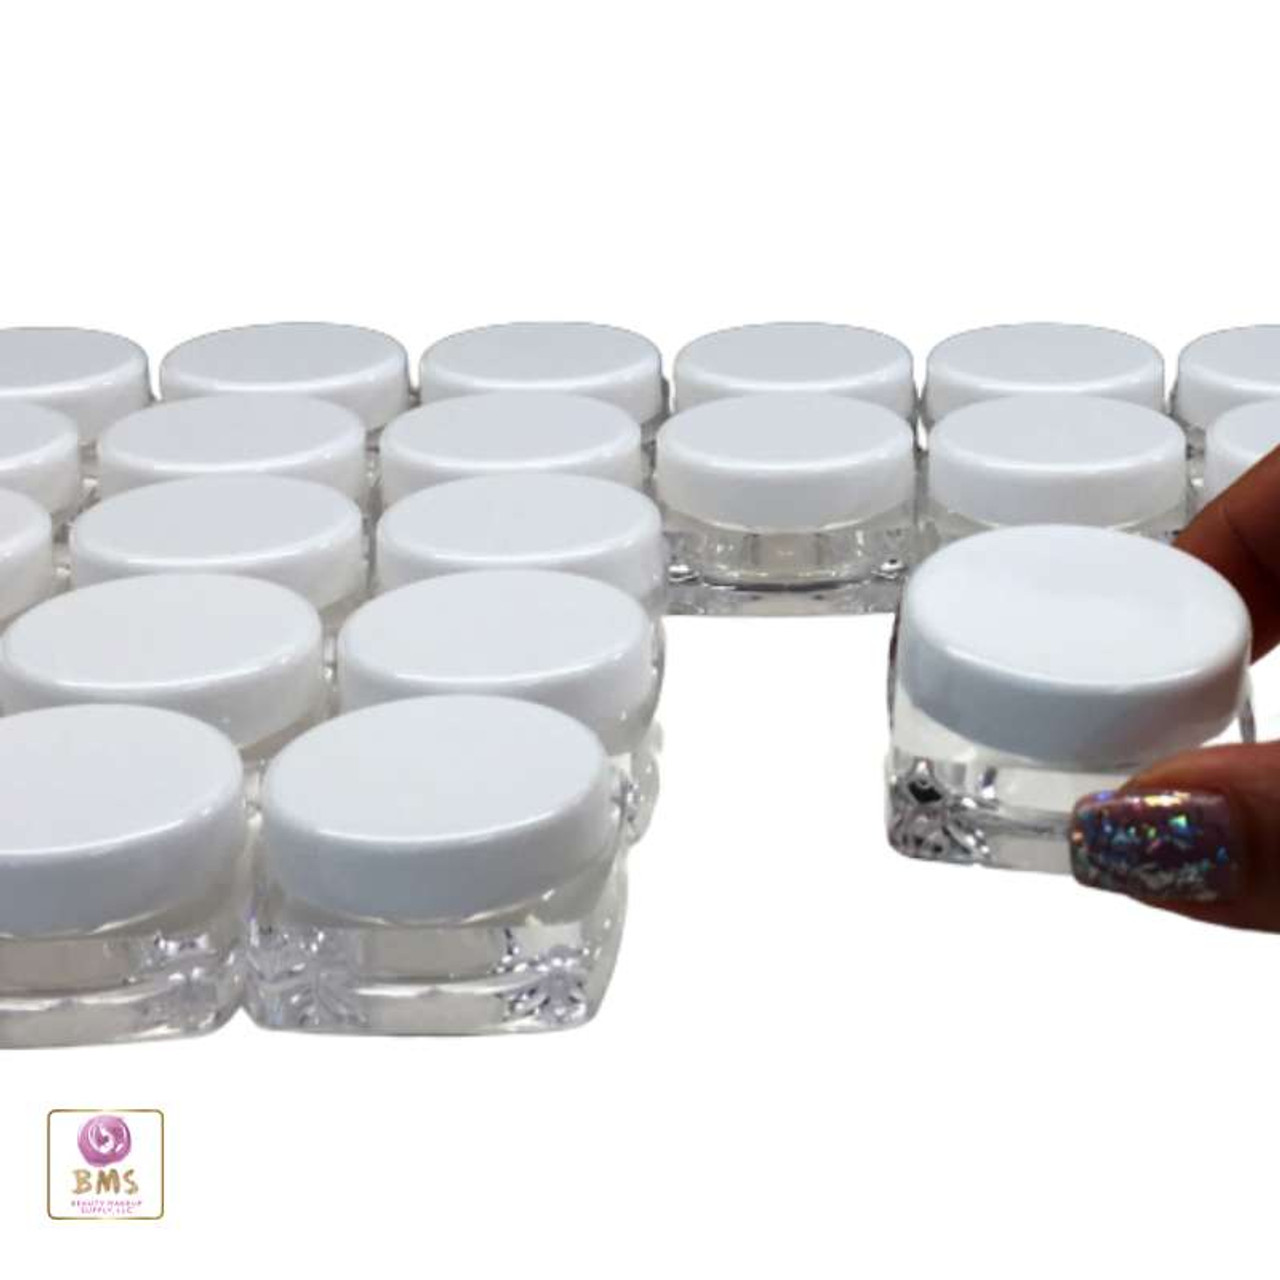 https://cdn11.bigcommerce.com/s-qd7k5gxi/images/stencil/1280x1280/products/264/6397/Cosmetic-Jars-Thick-Wall-Square-Beauty-Containers-10-Ml-Clear-White-Black-Cap_6226__02516.1660975777.jpg?c=2?imbypass=on